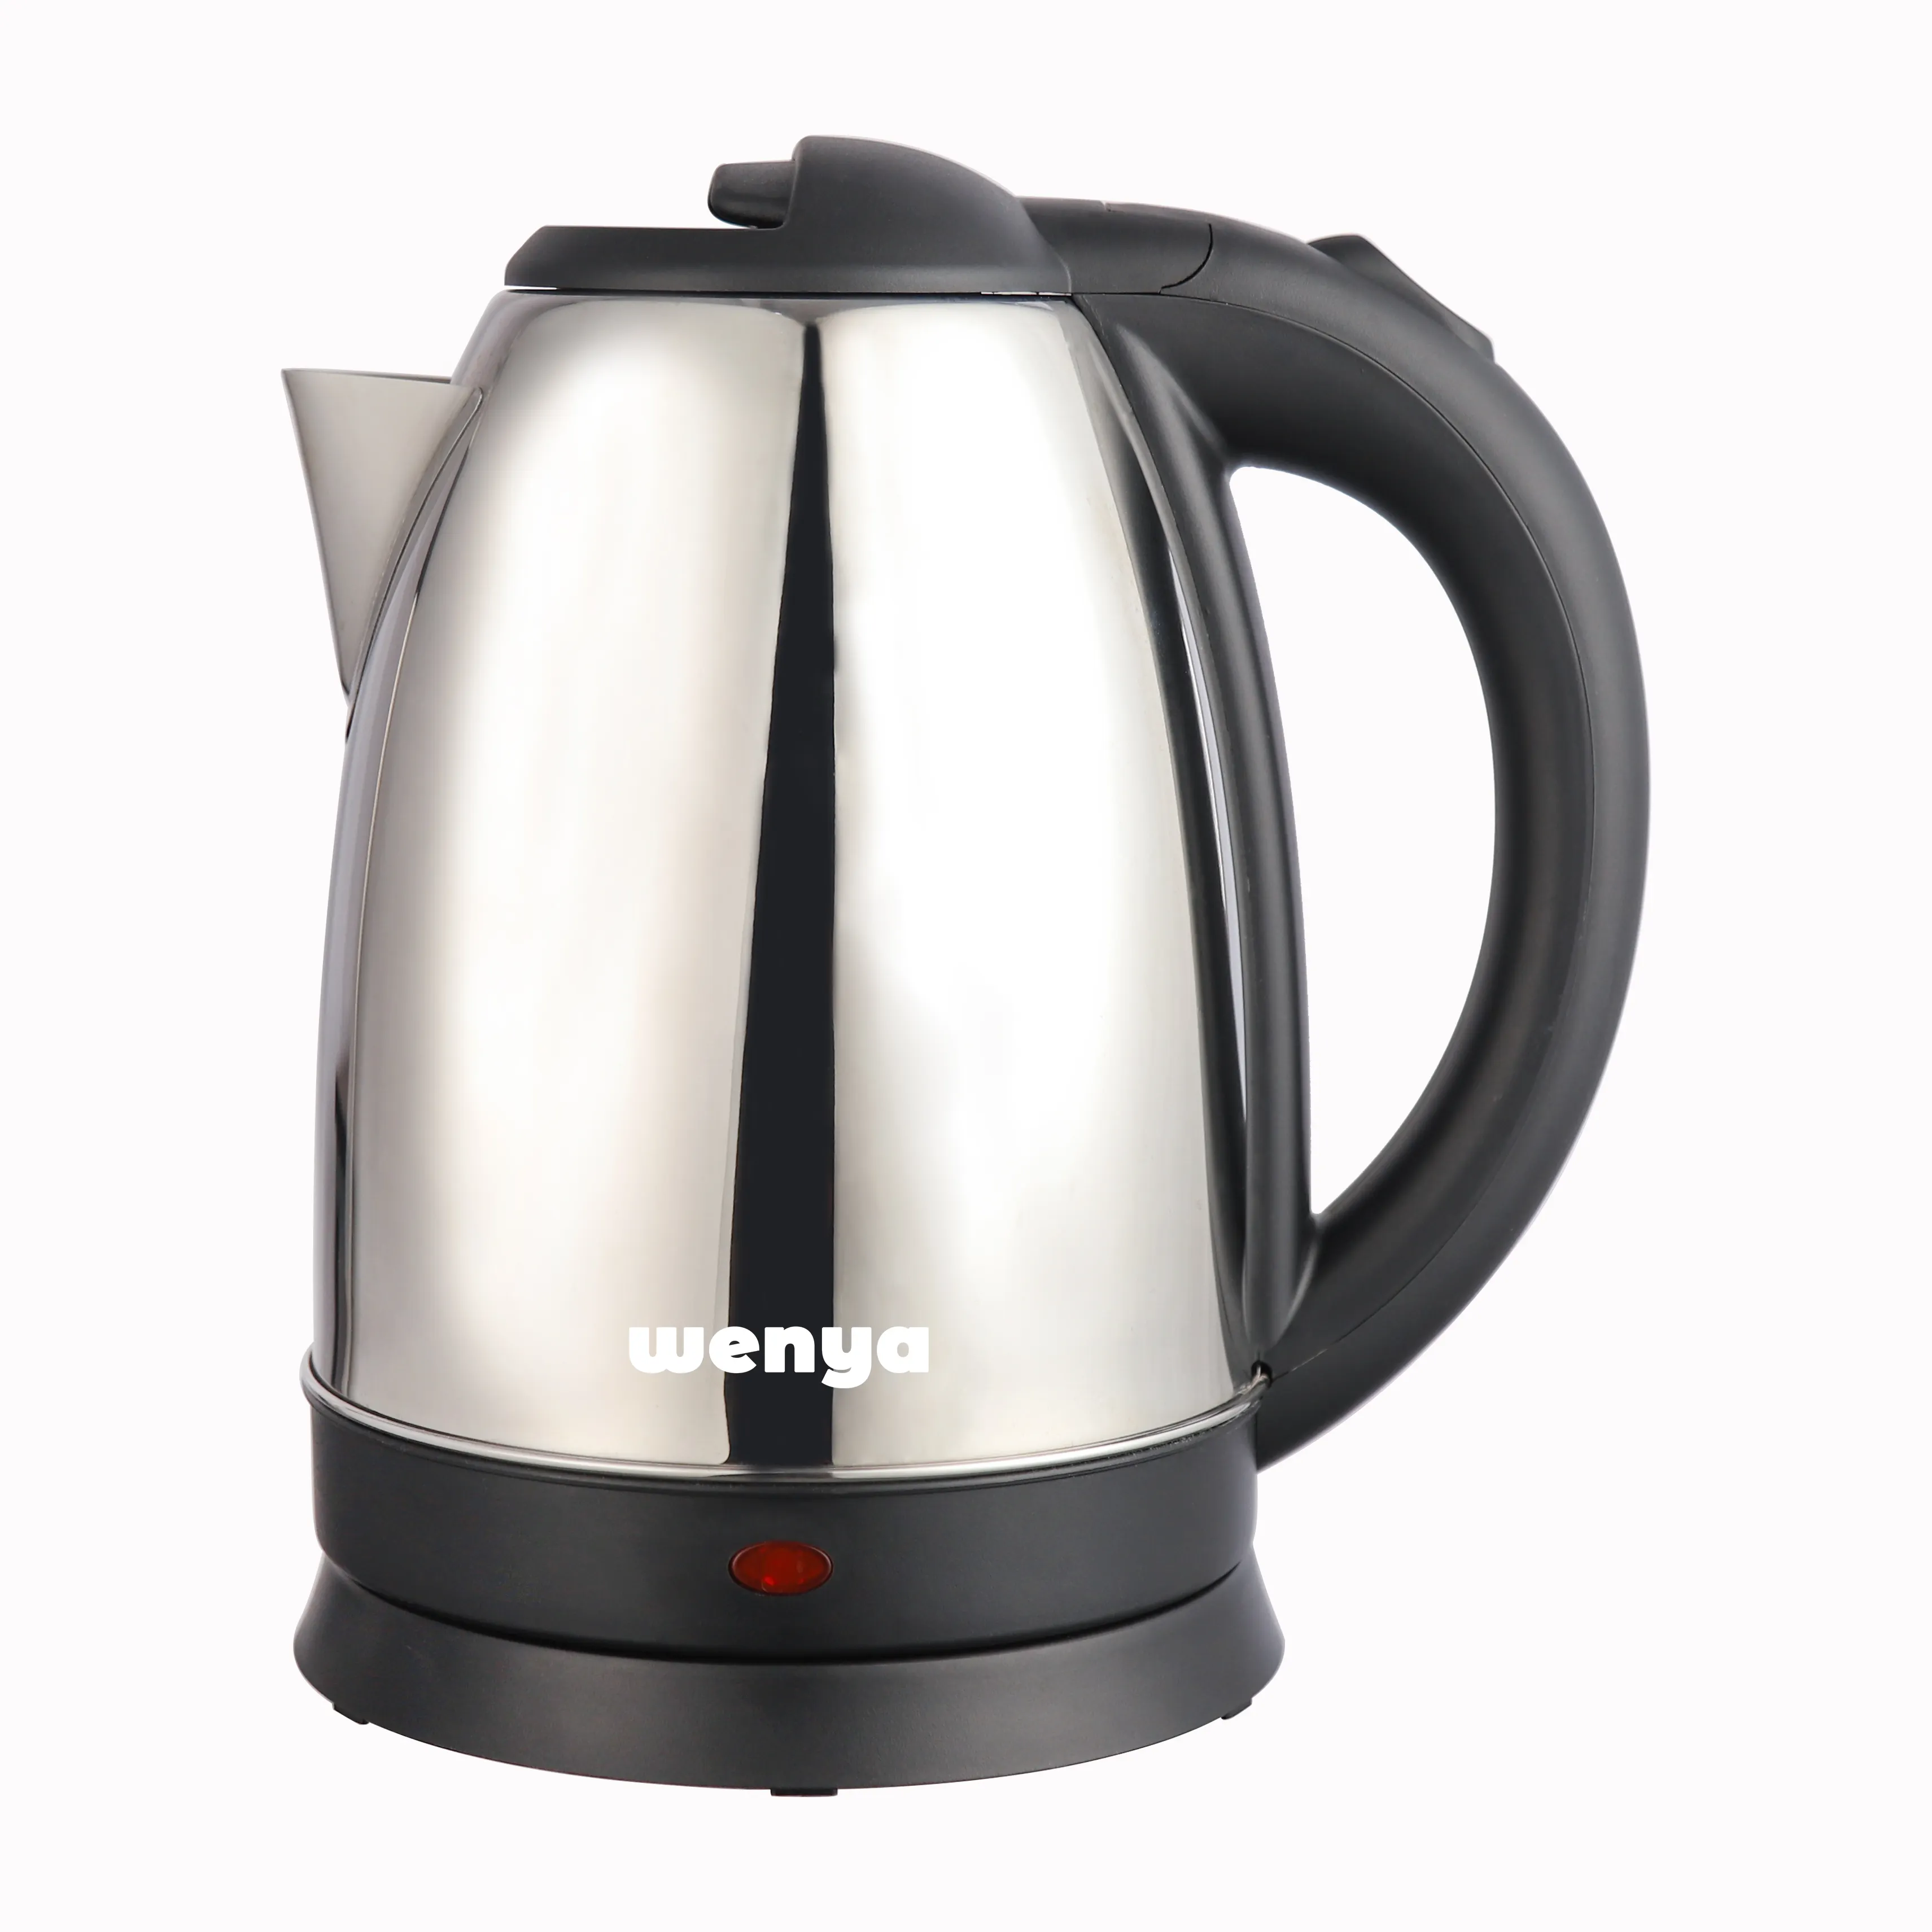 Small Home Appliances Portable Electric Kettle Stainless Steel Water Kettle Fast Tea Kettle 1.8L Hot Water